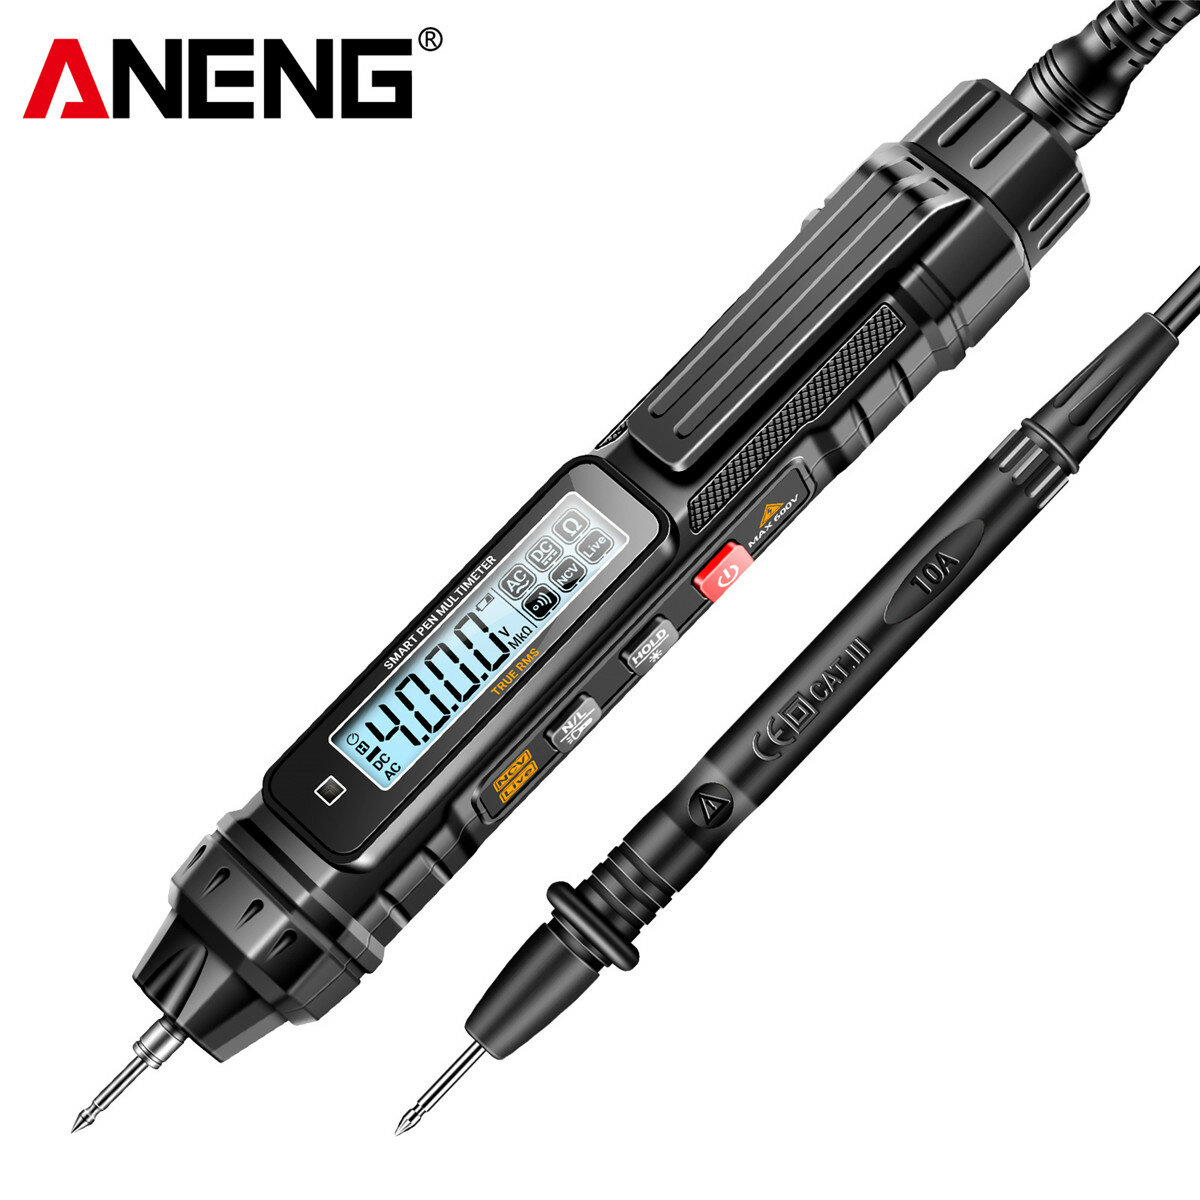 

ANENG A3005 Digital Multimeter Pen Type 4000 Counts Professional Meter Non-Contact Auto AC/DC Voltage Ohm Diode Tester F